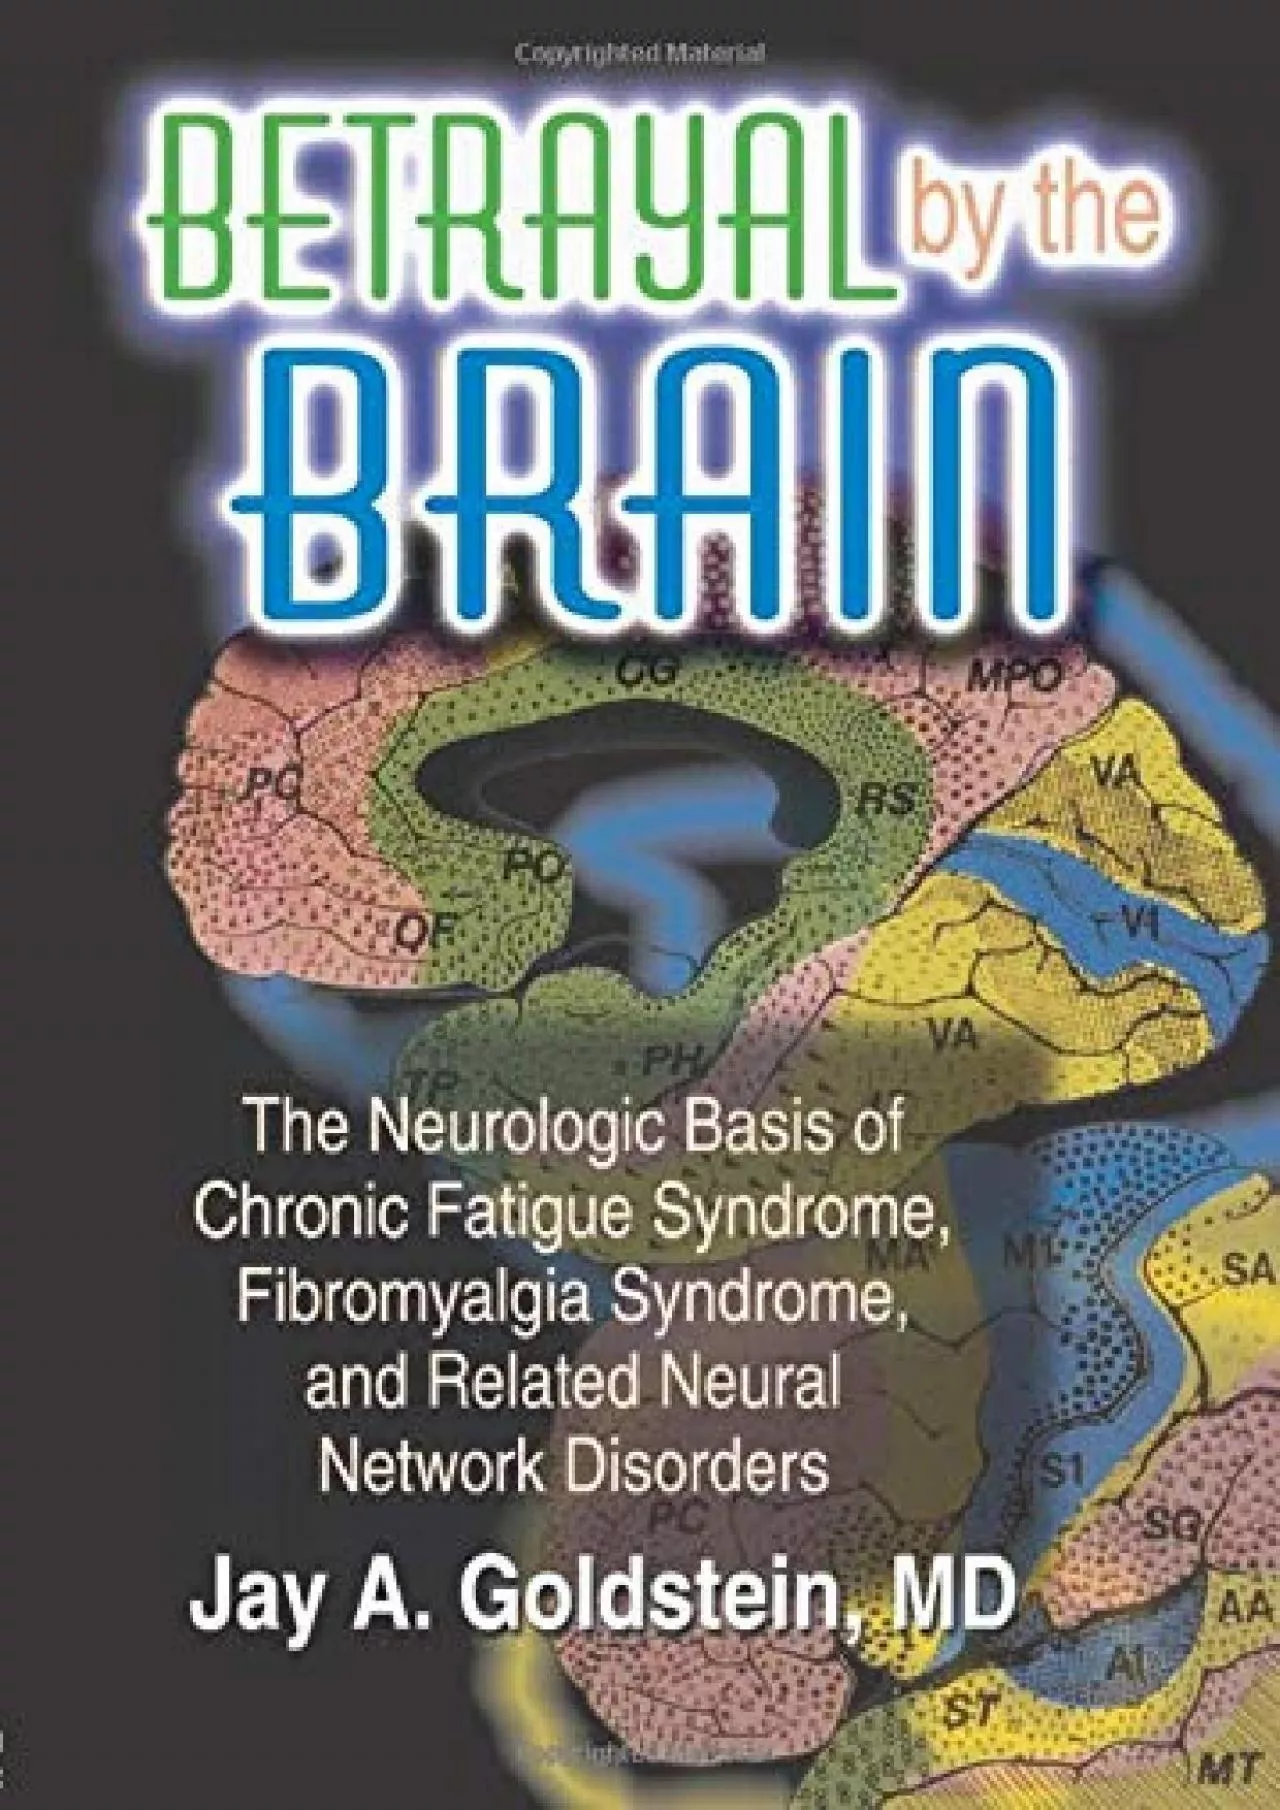 (DOWNLOAD)-Betrayal by the Brain: The Neurologic Basis of Chronic Fatigue Syndrome, Fibromyalgia